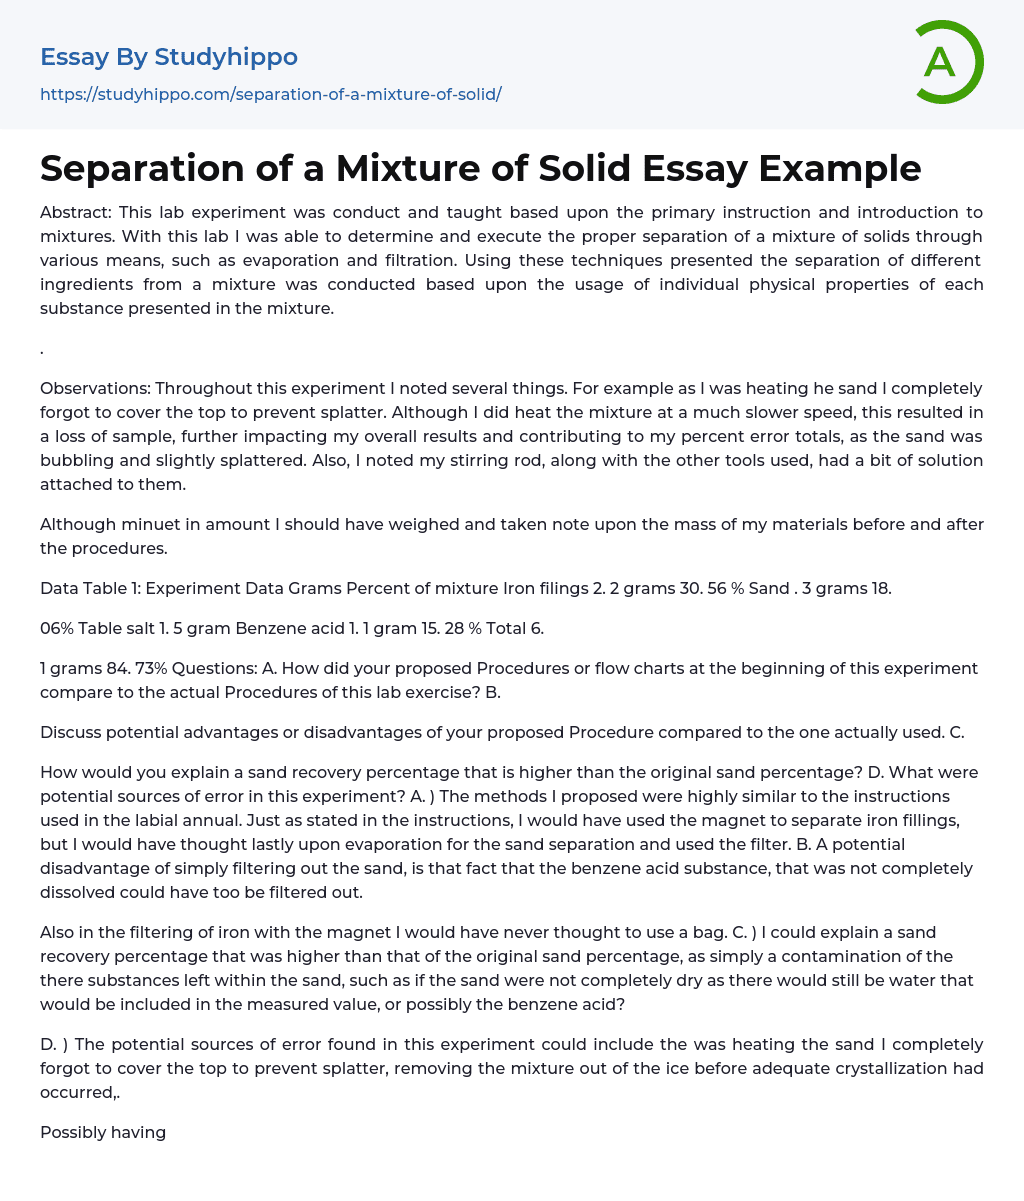 Separation of a Mixture of Solid Essay Example